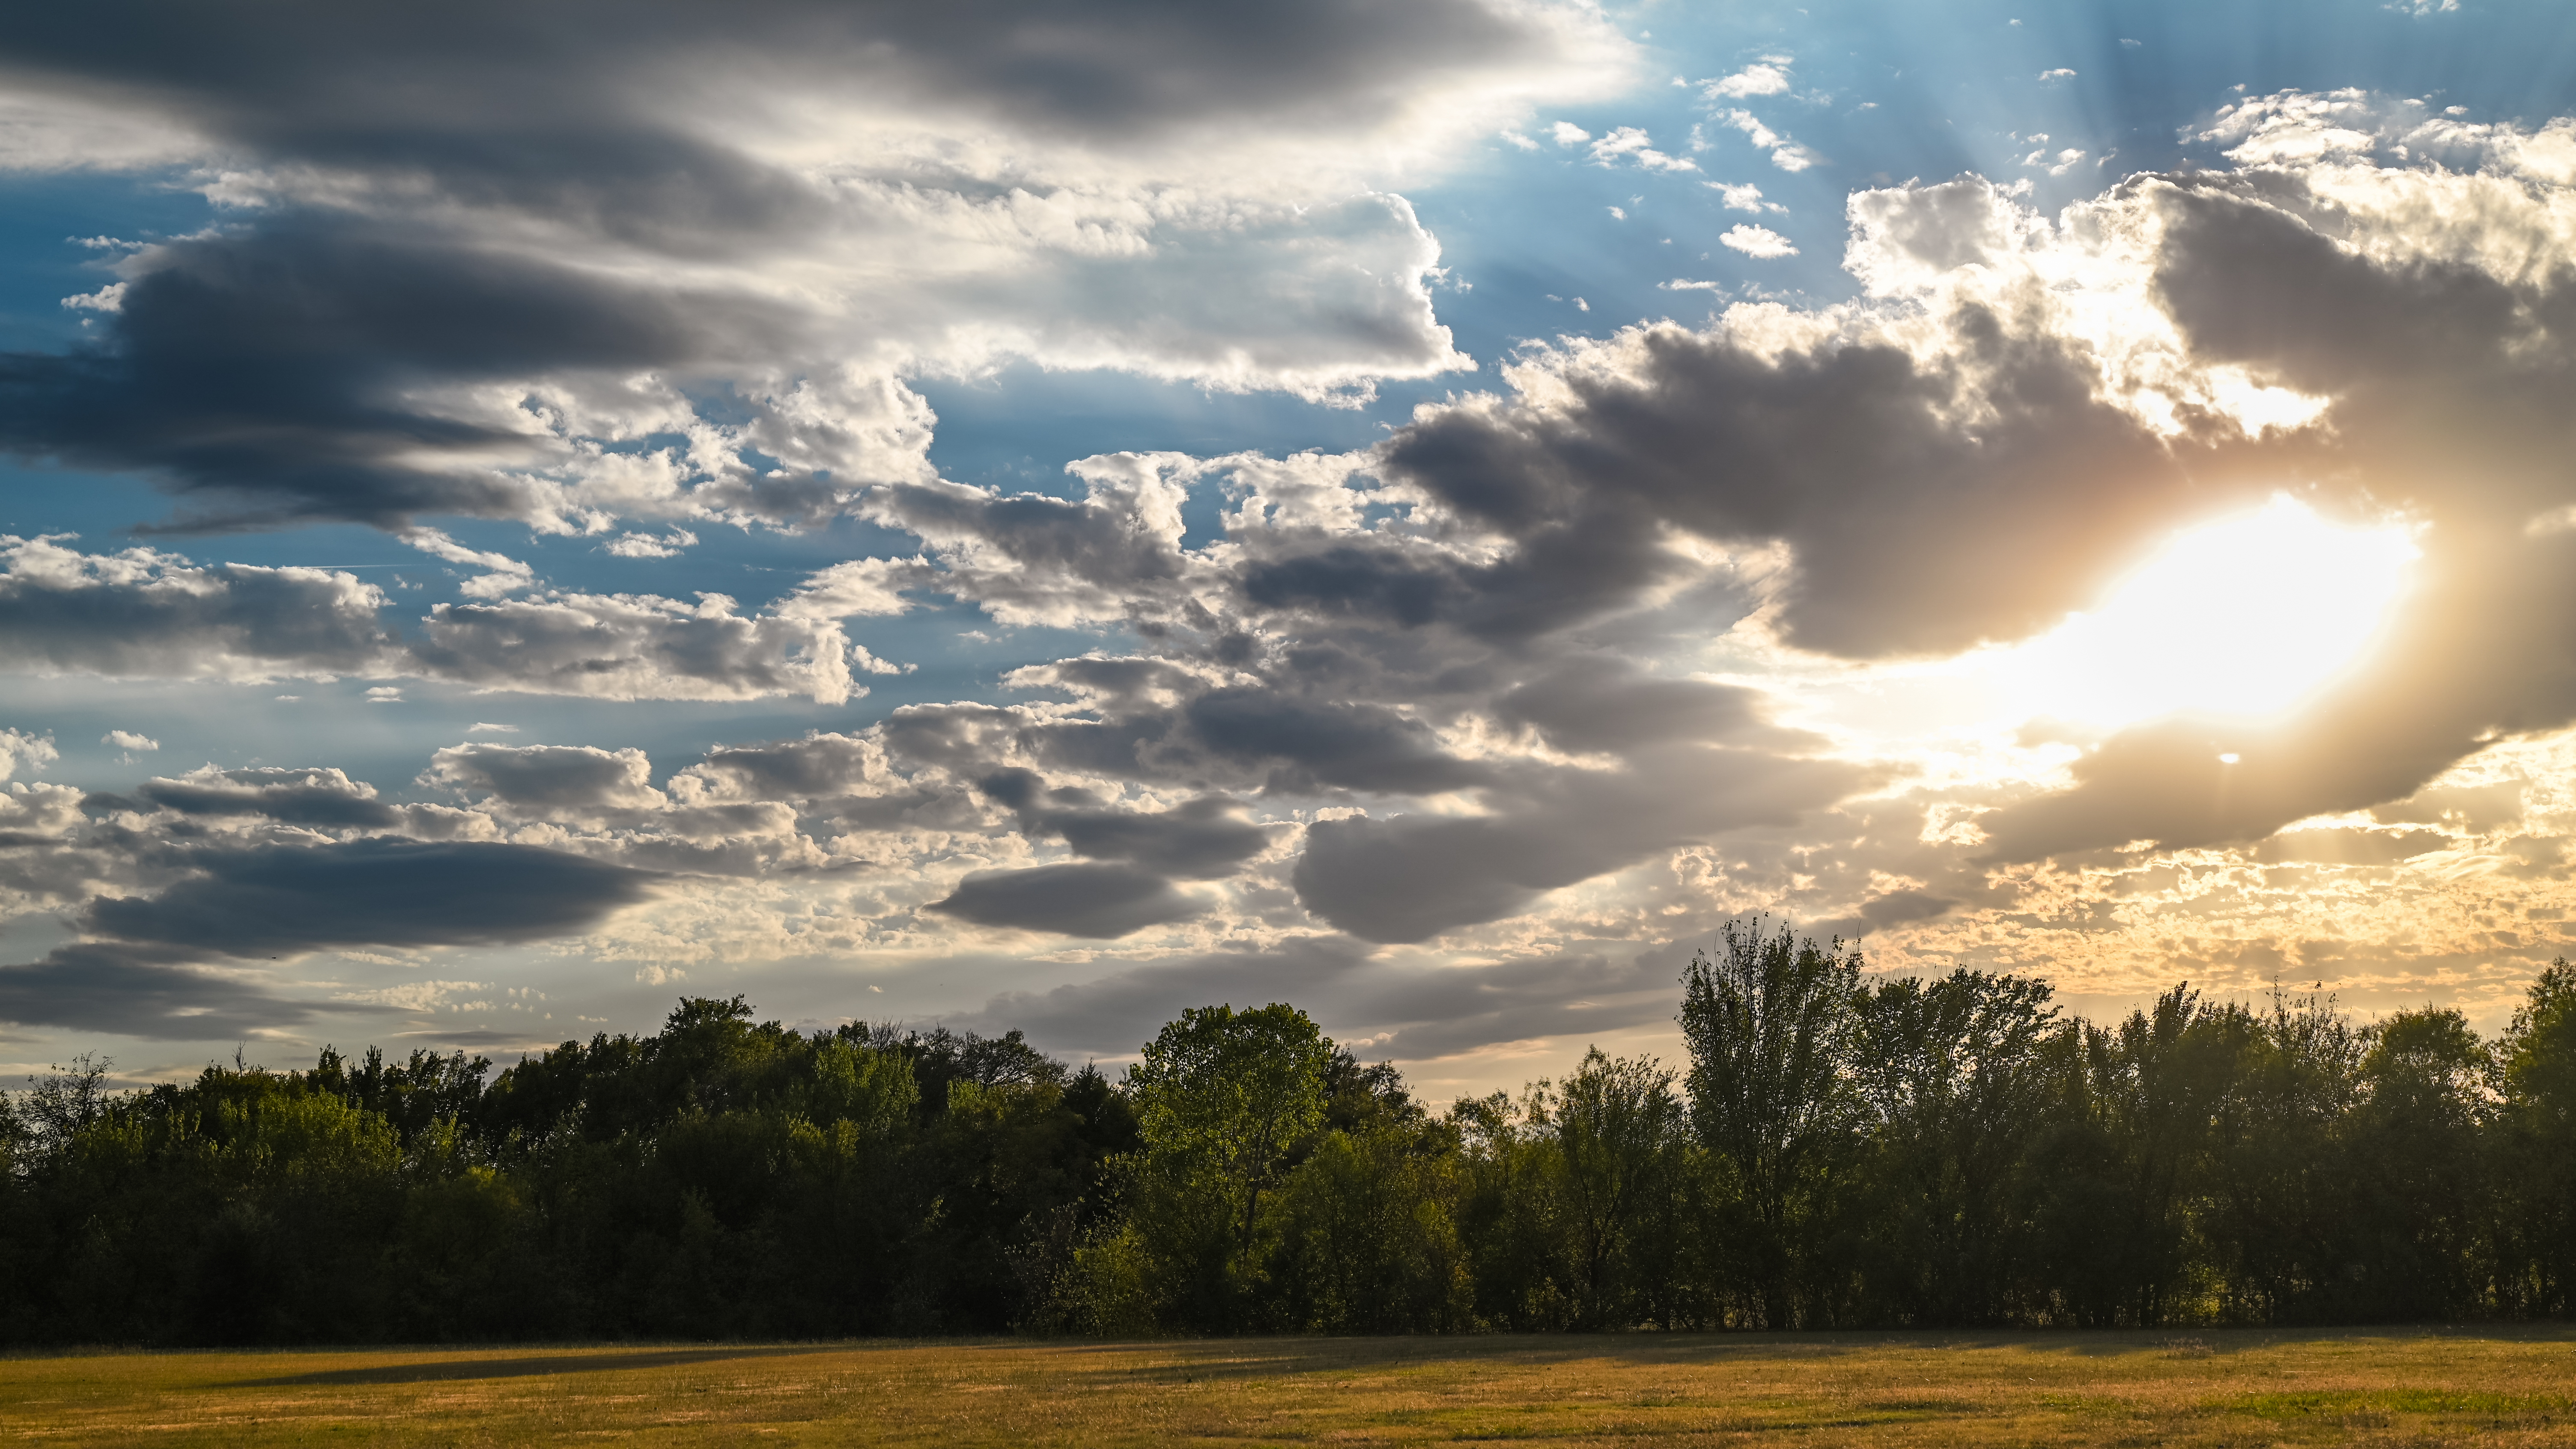 Sunset Clouds Nature Photography Outdoors Landscape Sun Rays 6016x3384